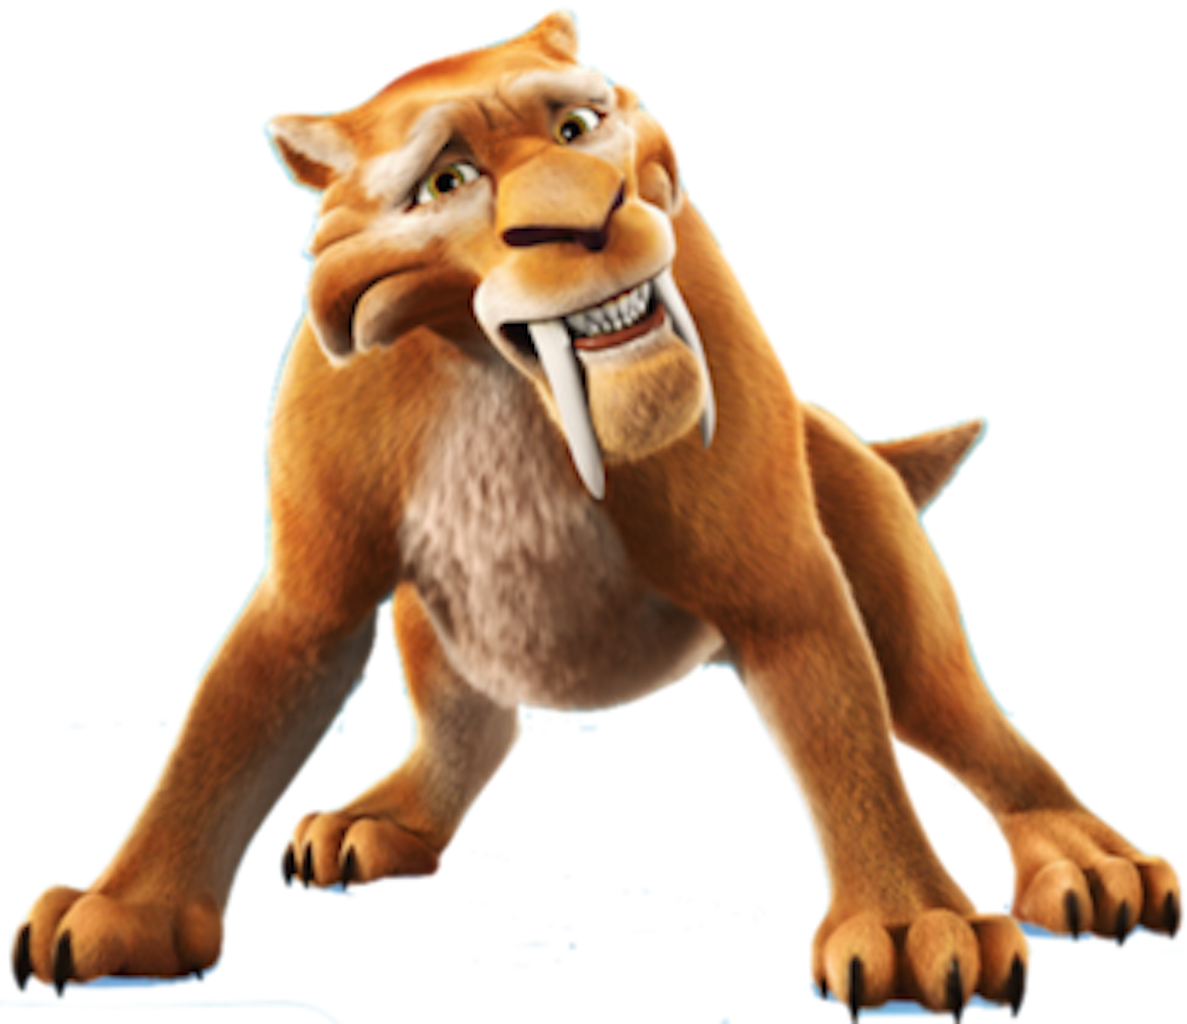 ice age continental drift diego and shira fanfiction